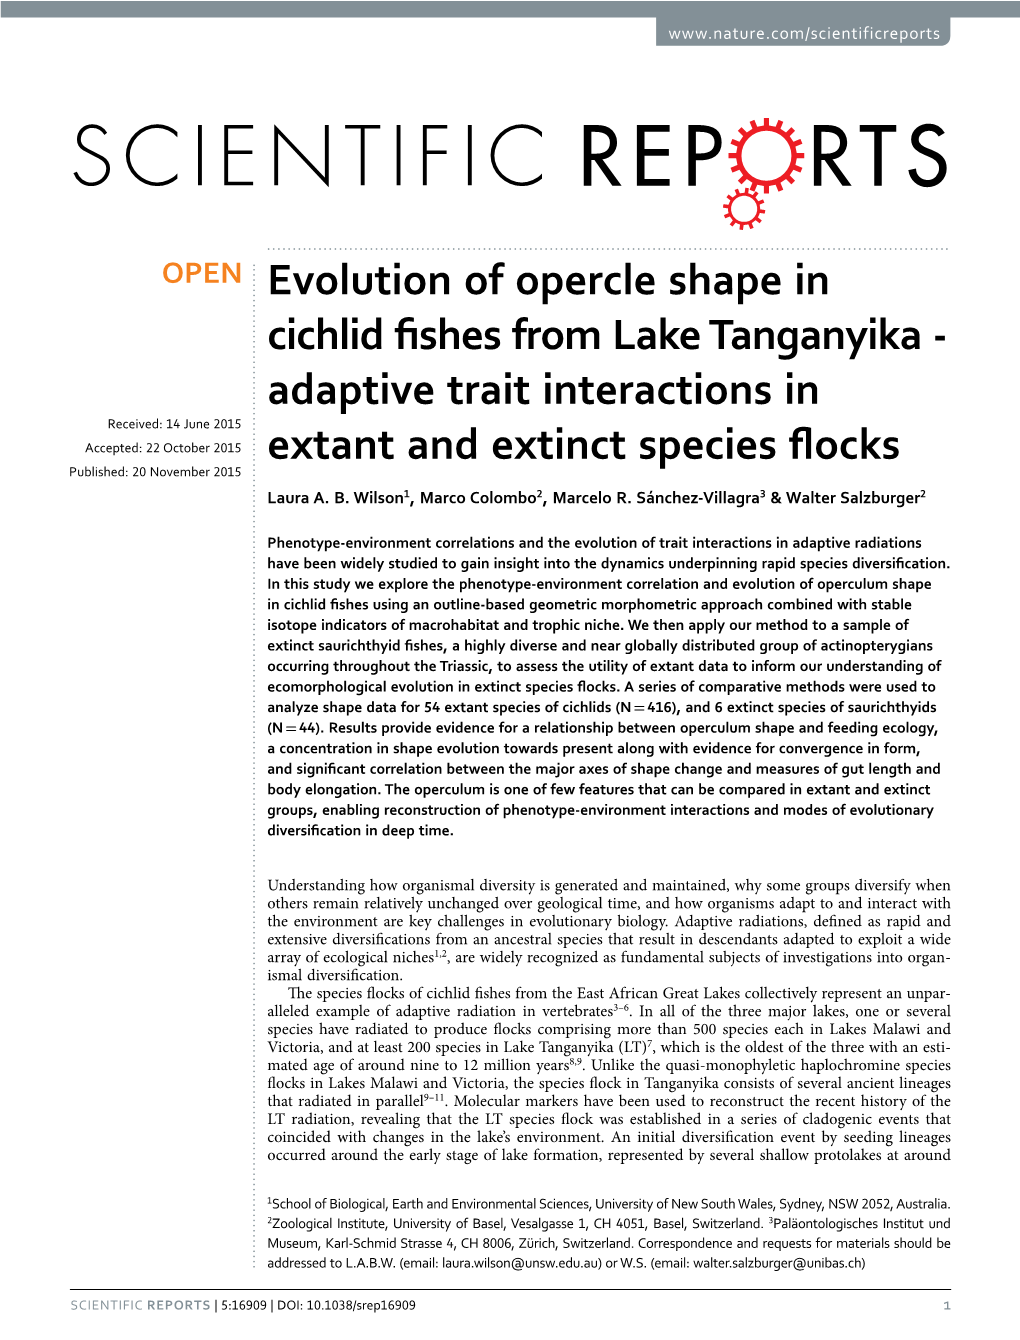 Evolution of Opercle Shape in Cichlid Fishes from Lake Tanganyika